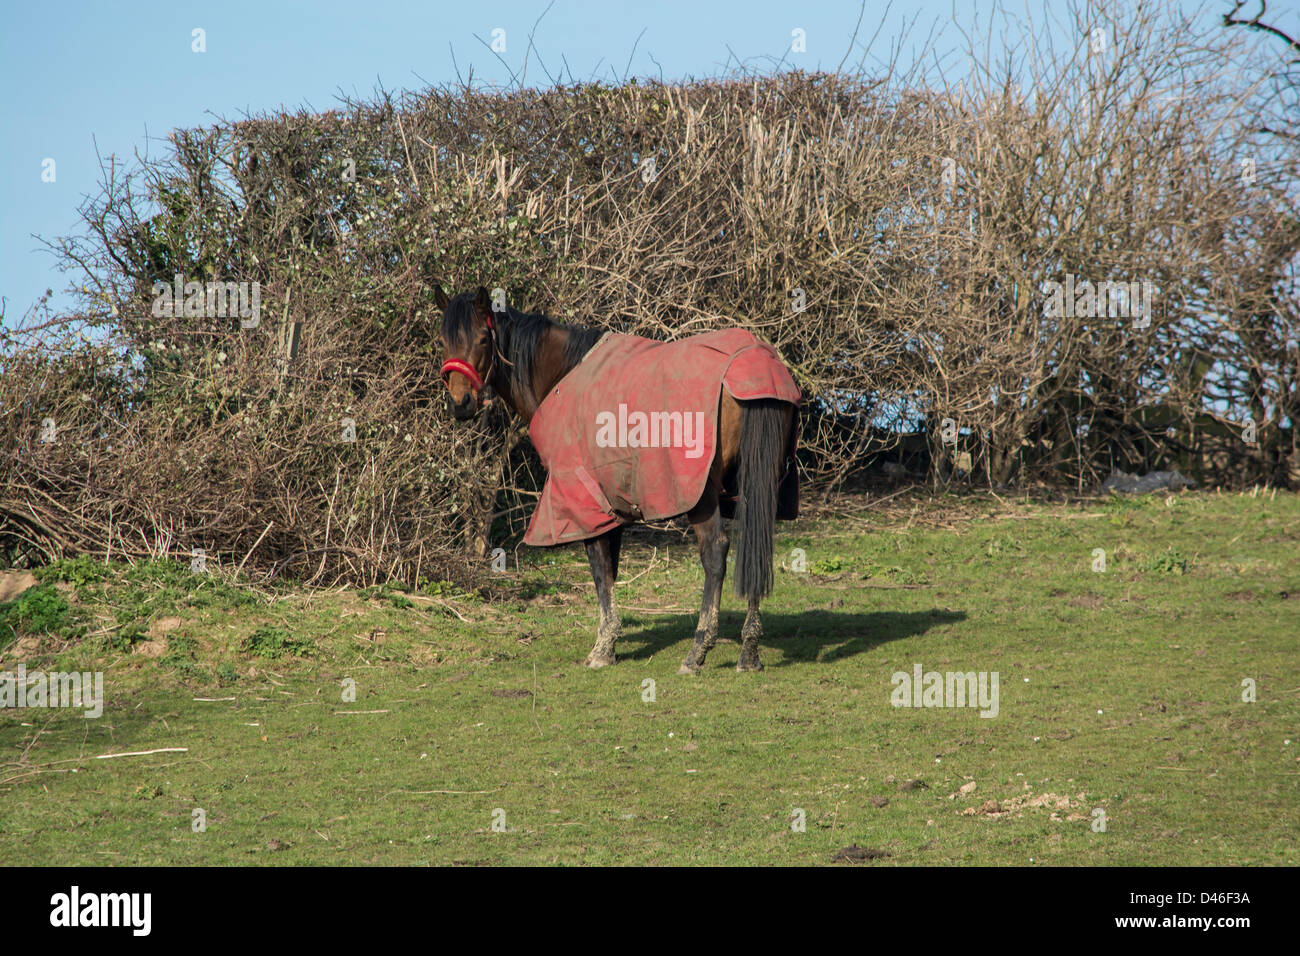 Though its sunny its still winter and cold so this horse is well wrapped up Stock Photo